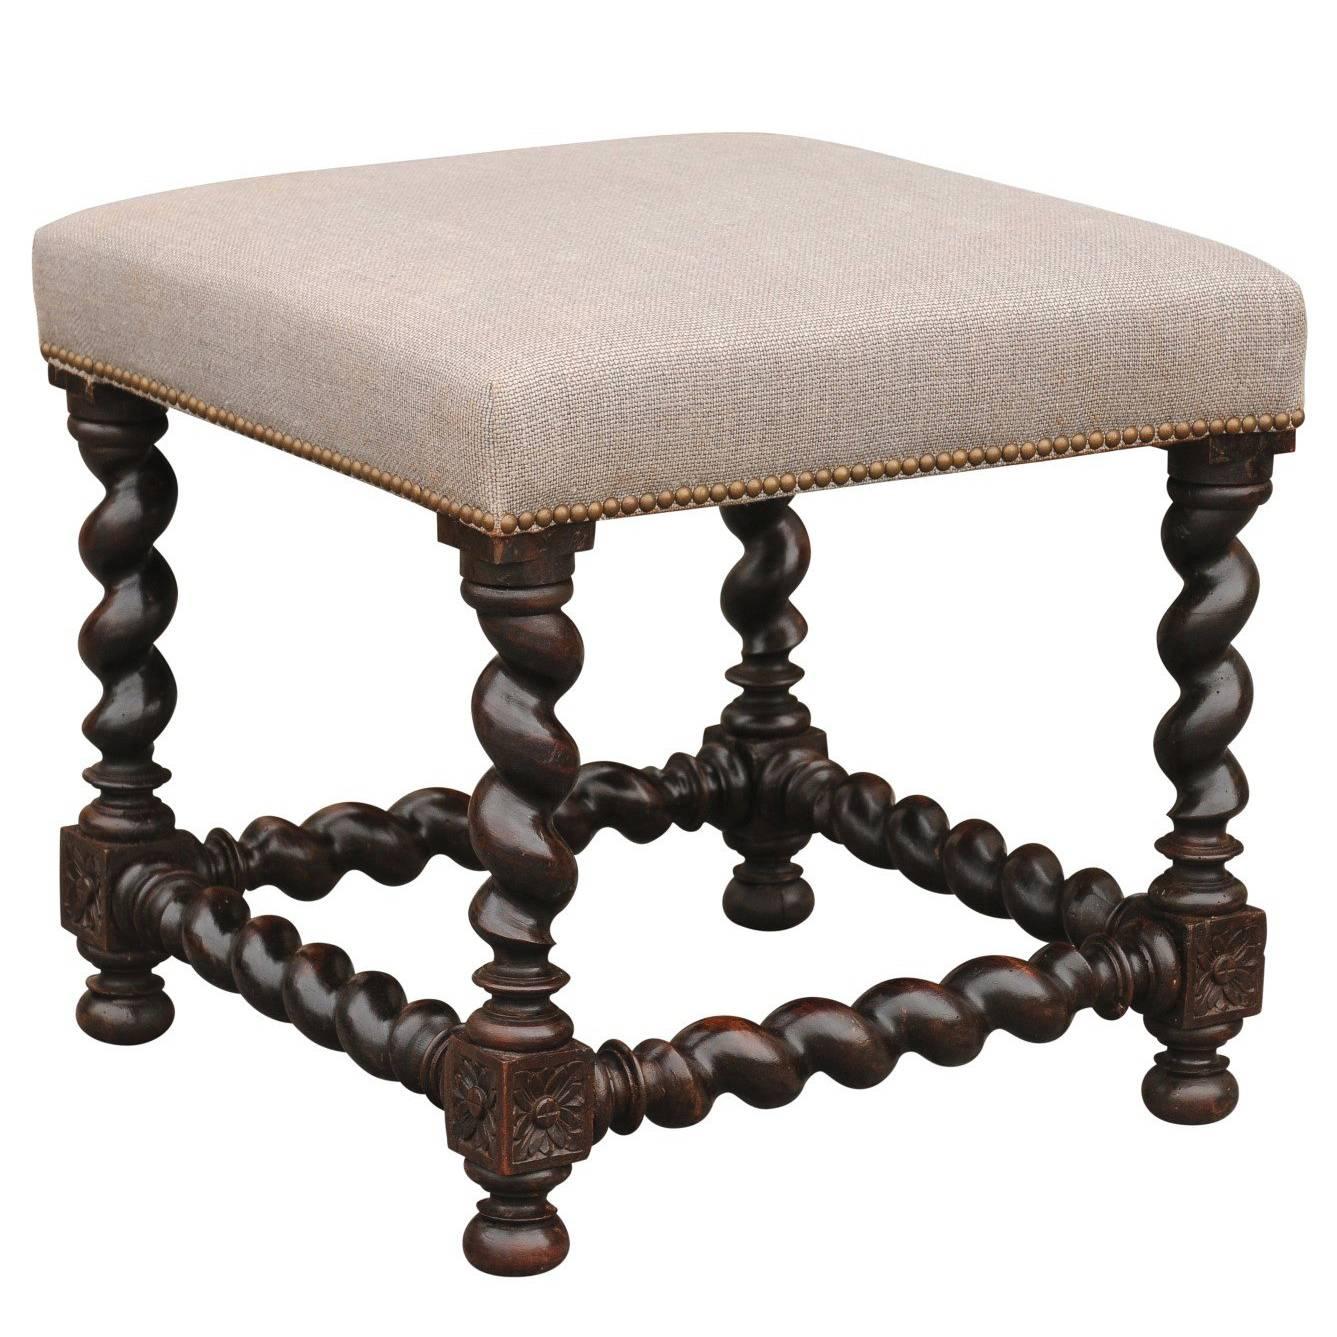 English Barley Twist Upholstered Wooden Stool from the 19th Century